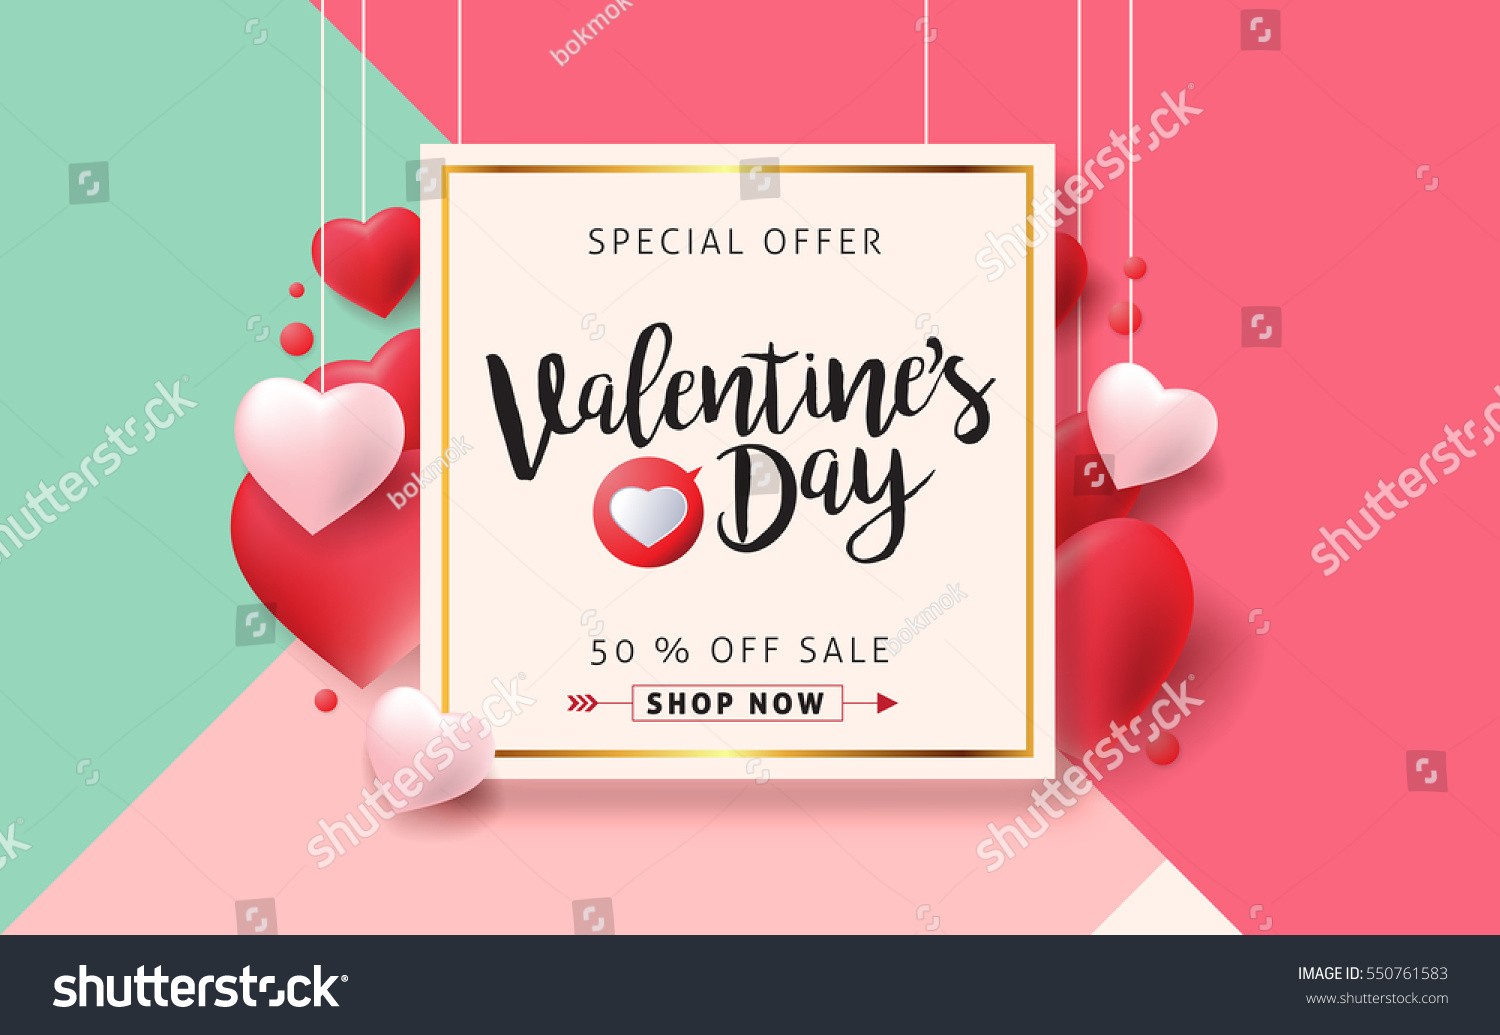 Valentines day sale background with Heart Shaped Balloons. Vector illustration.Wallpaper.flyers, invitation, posters, brochure, banners. #550761583